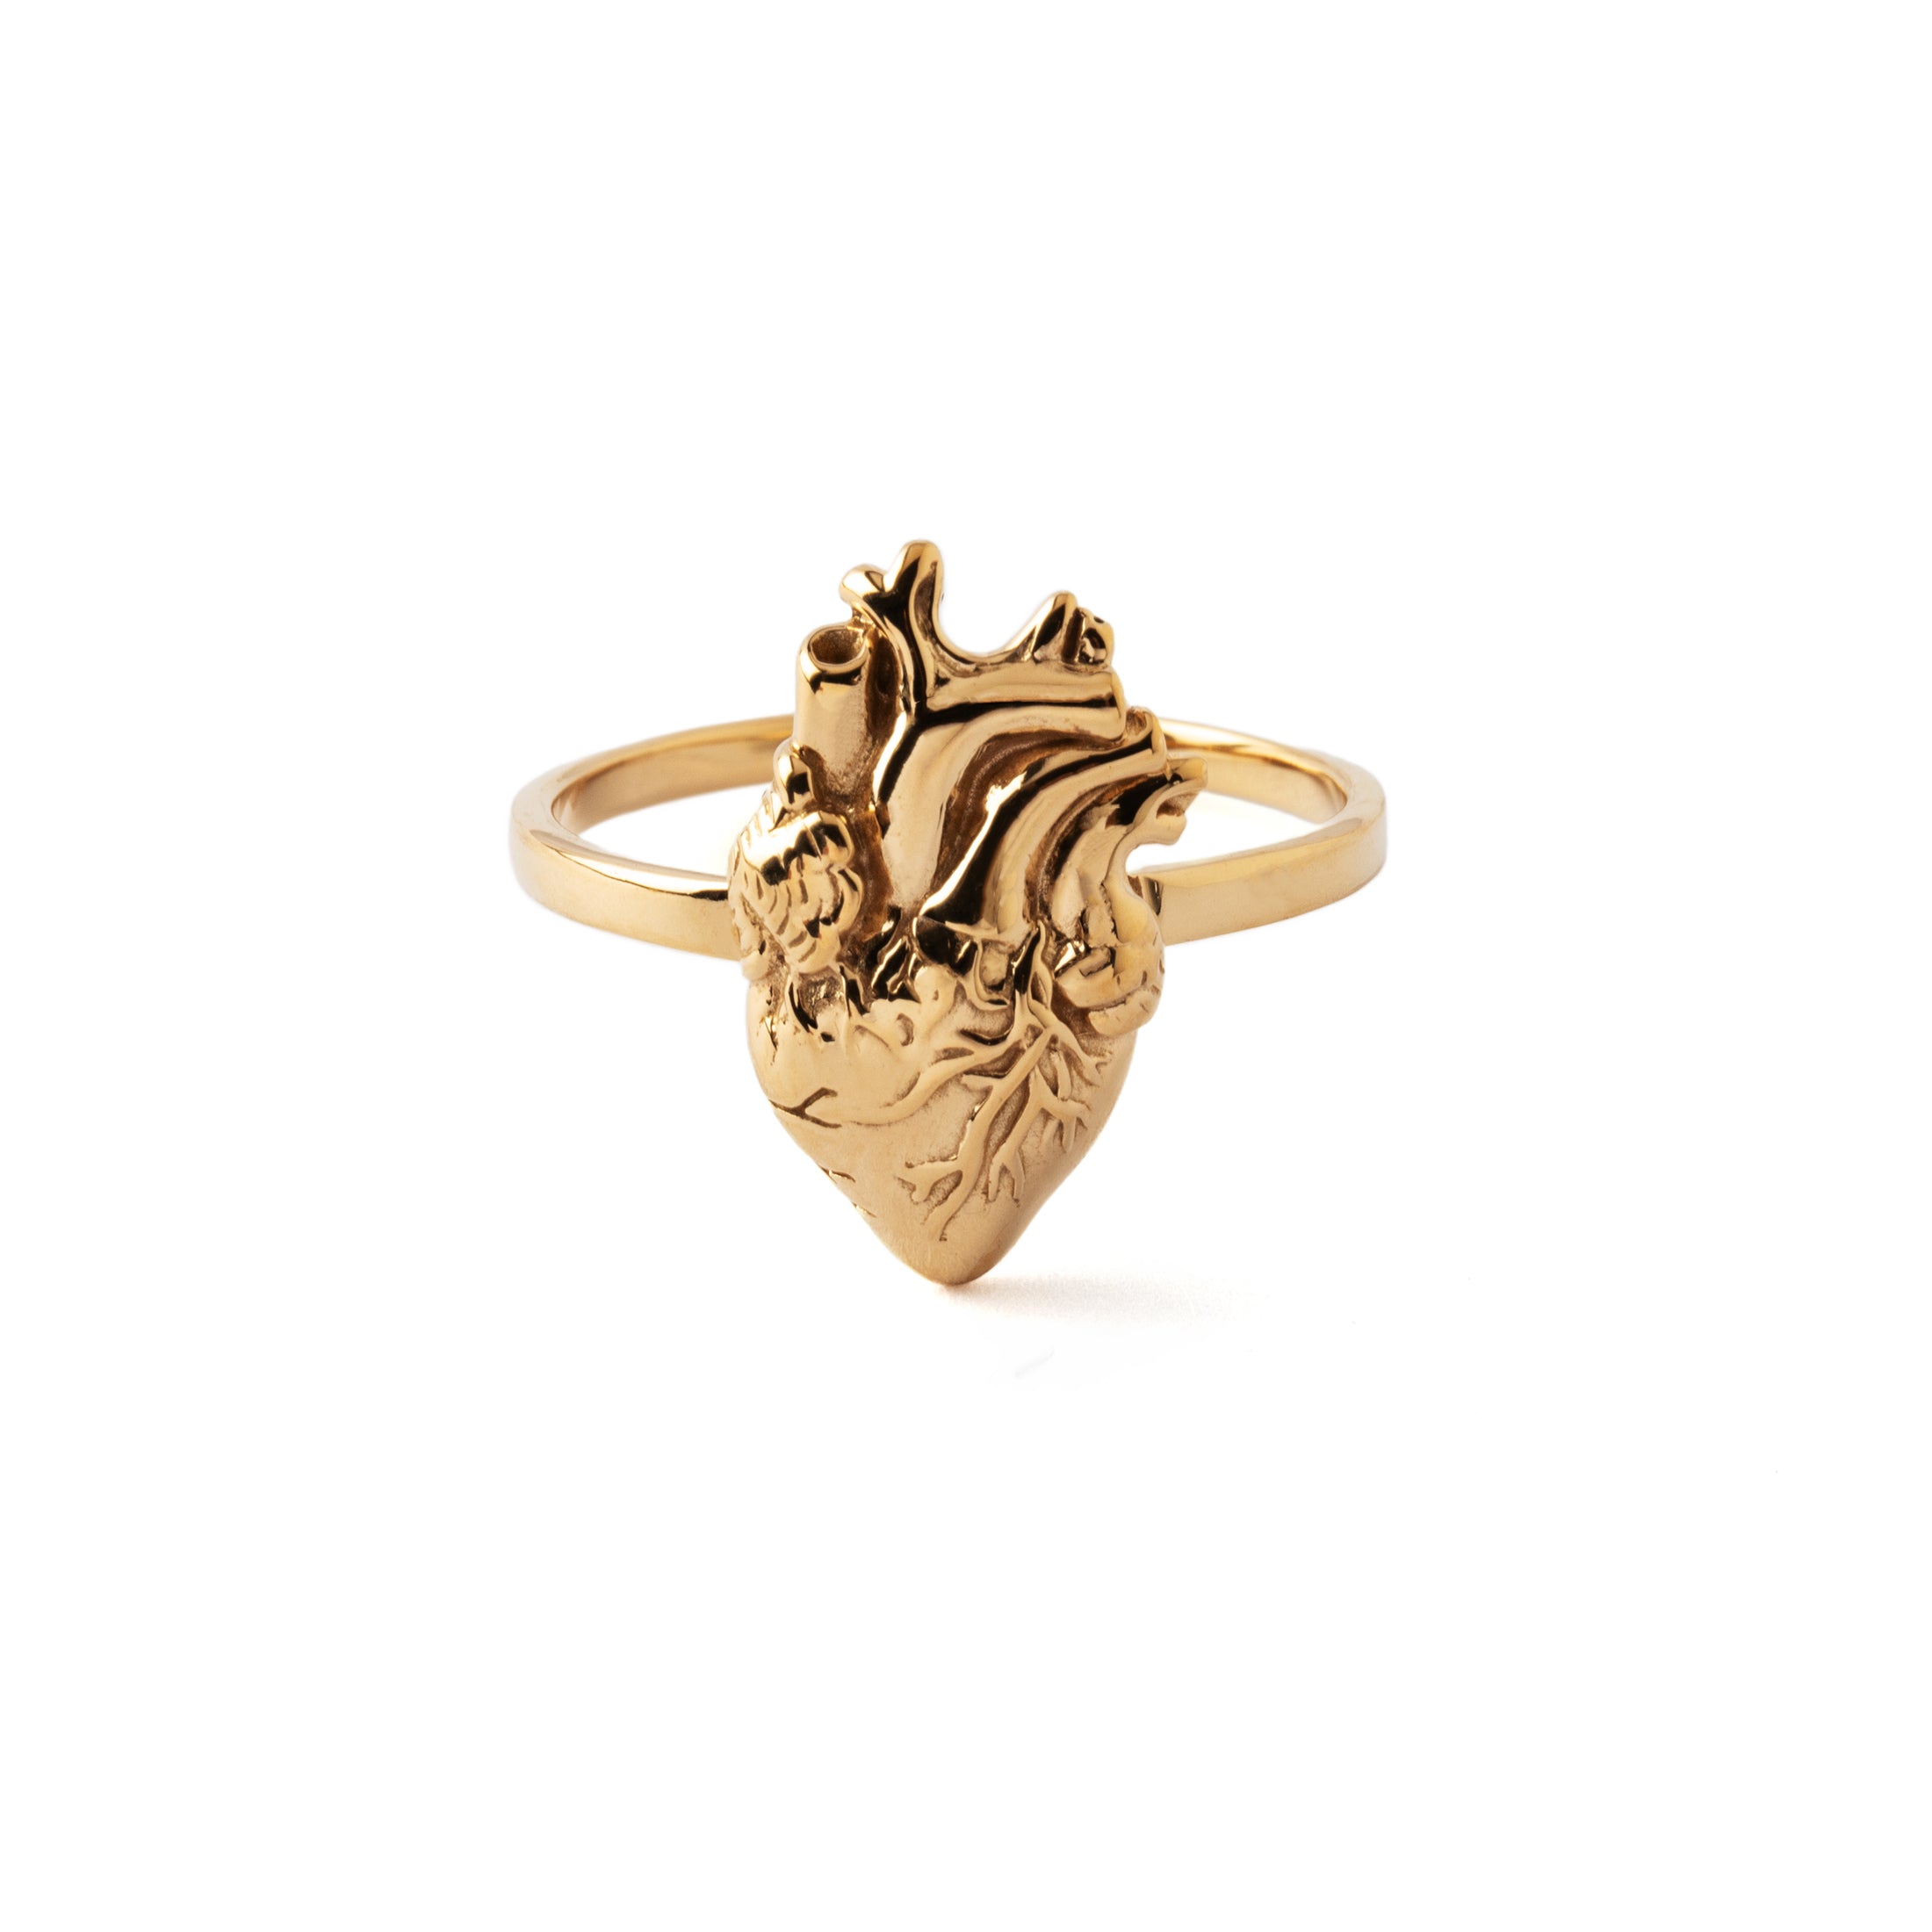 Anatomic Bronze Heart Ring frontal view